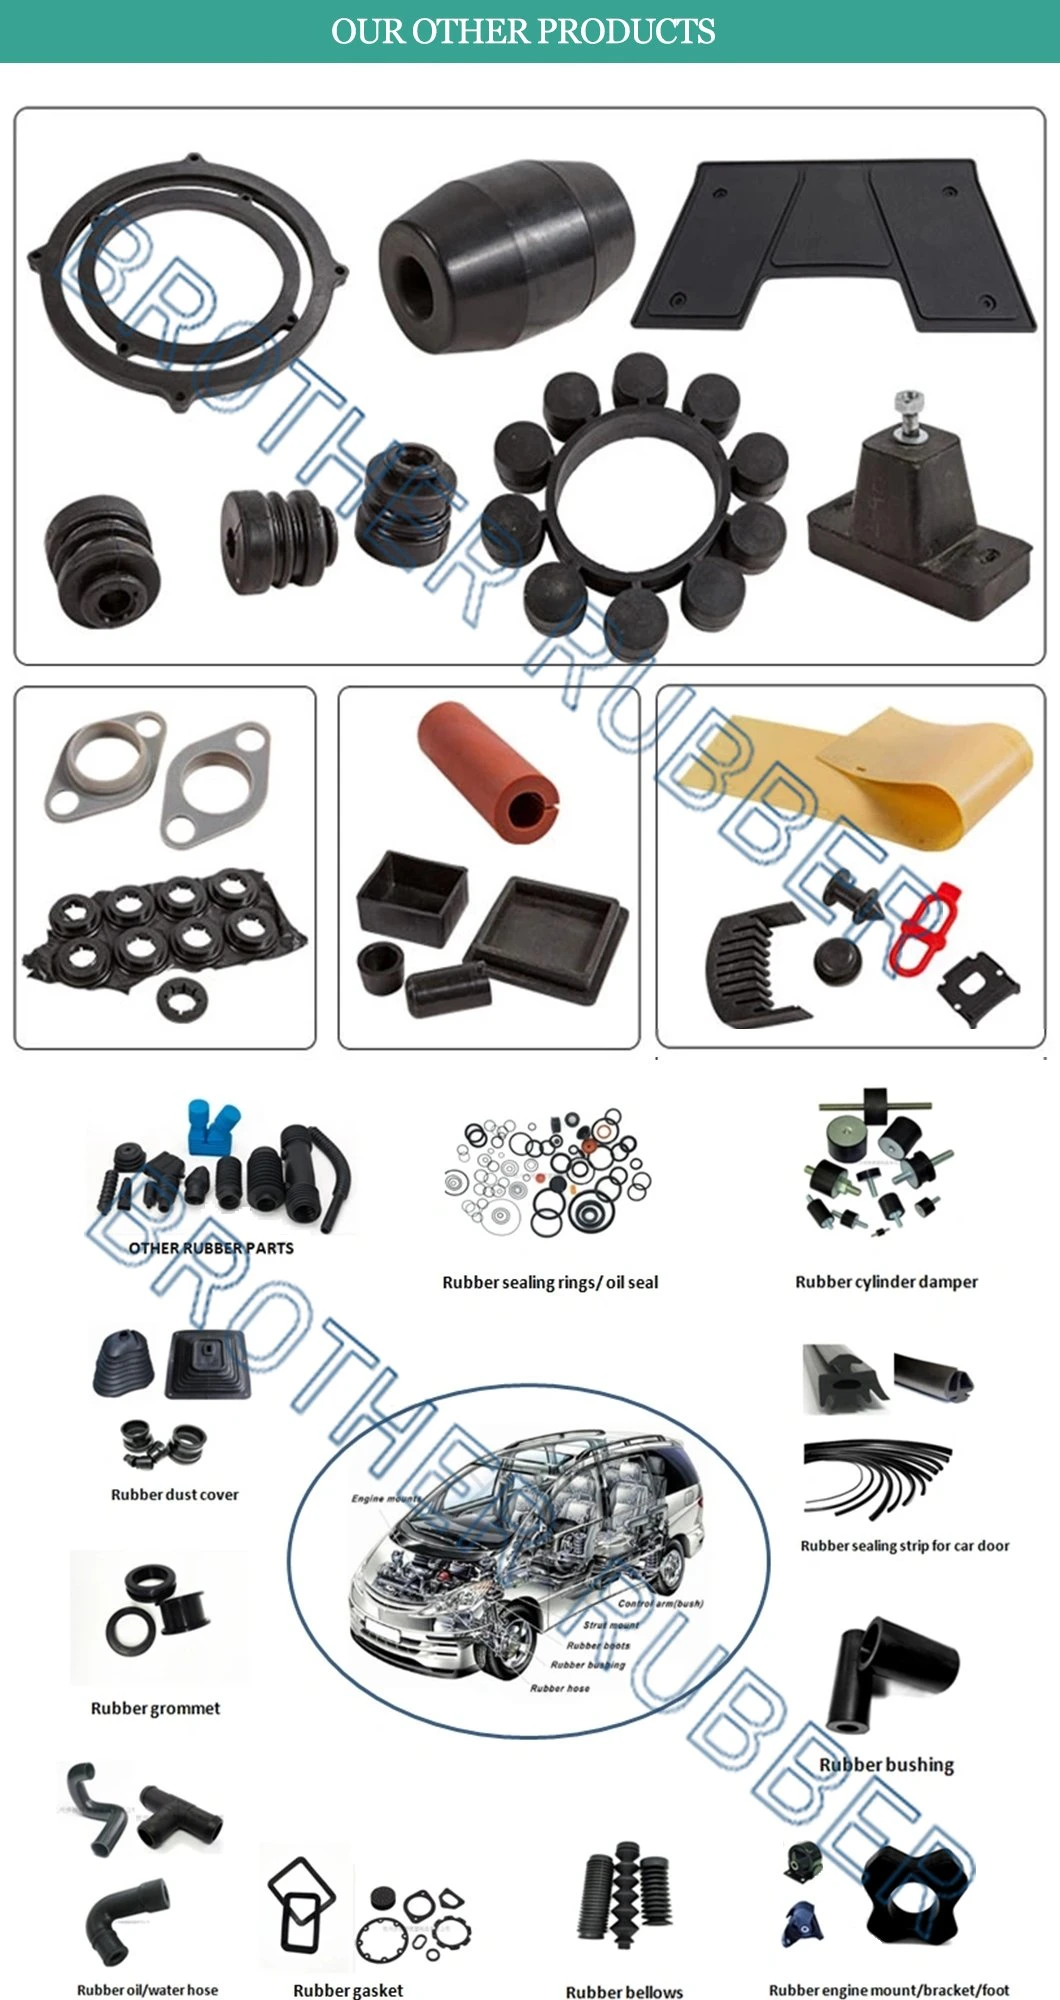 Rubber Engine Mount Cylindrical Generator Air Conditioner Anti Vibration Mountings Damper with Screw Rubber Engine Mount